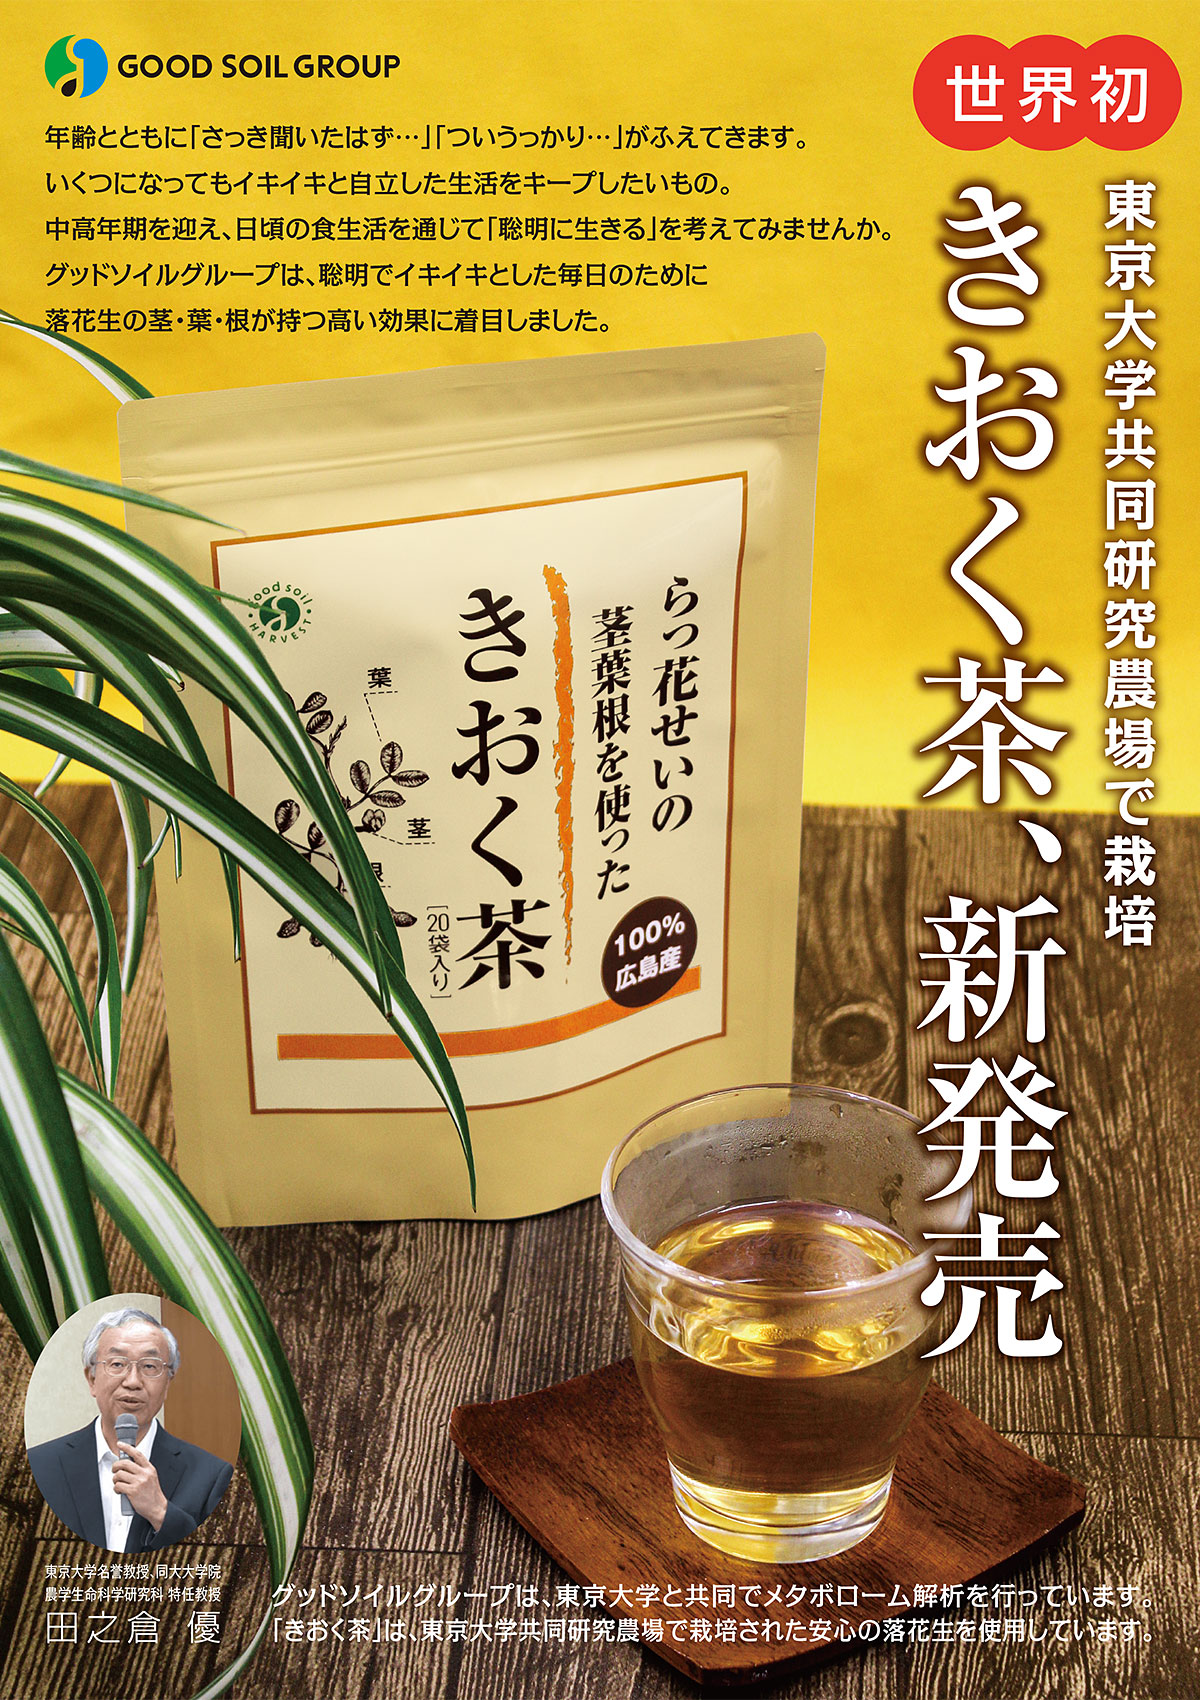 World-first! Kioku tea New release! We are conducting metabolome analysis in collaboration with the University of Tokyo.